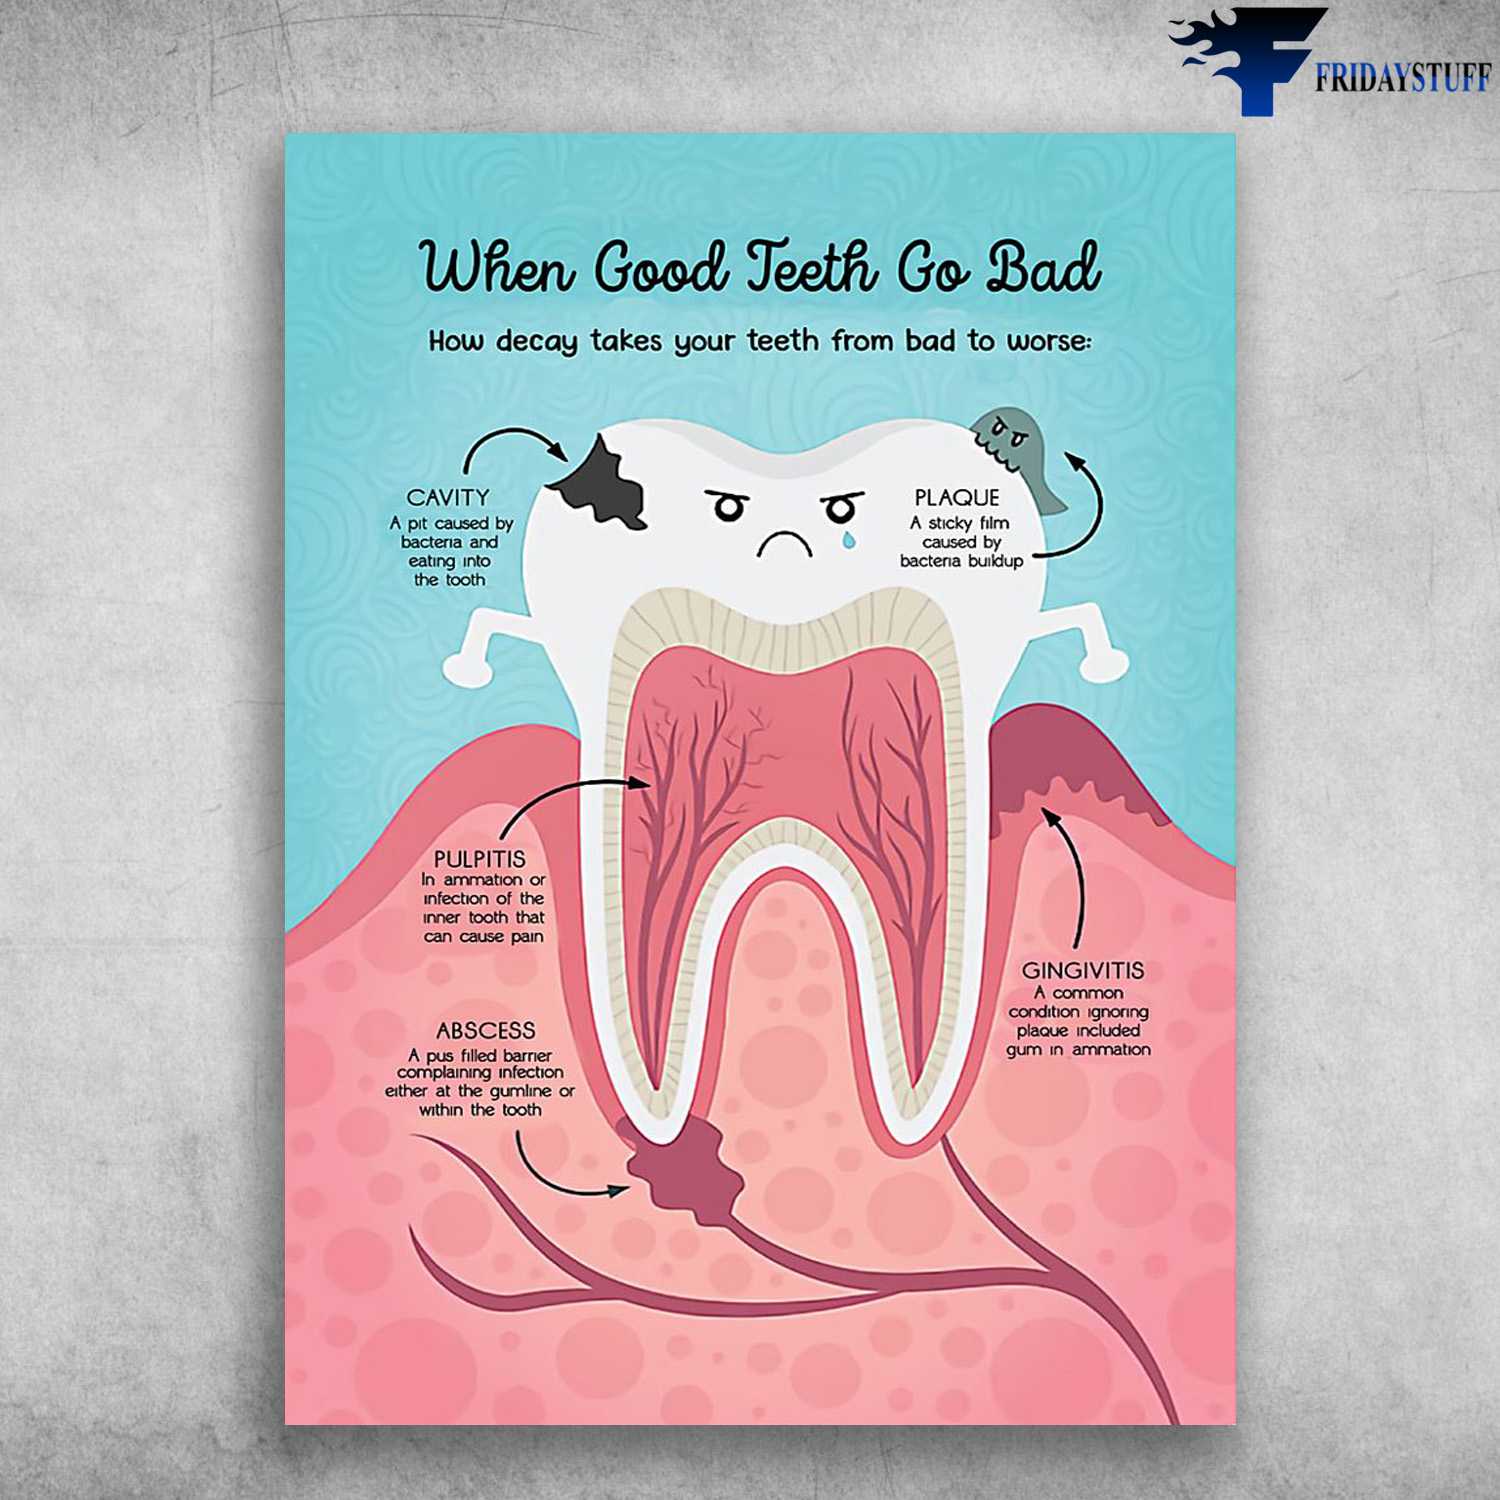 Teeth Care, Dentist Poster - When Good Teeth Go Bad, How Decay Takes From Bad To Worse, Cavity , Plaque, Pulptis, Abscess, Gingivitis